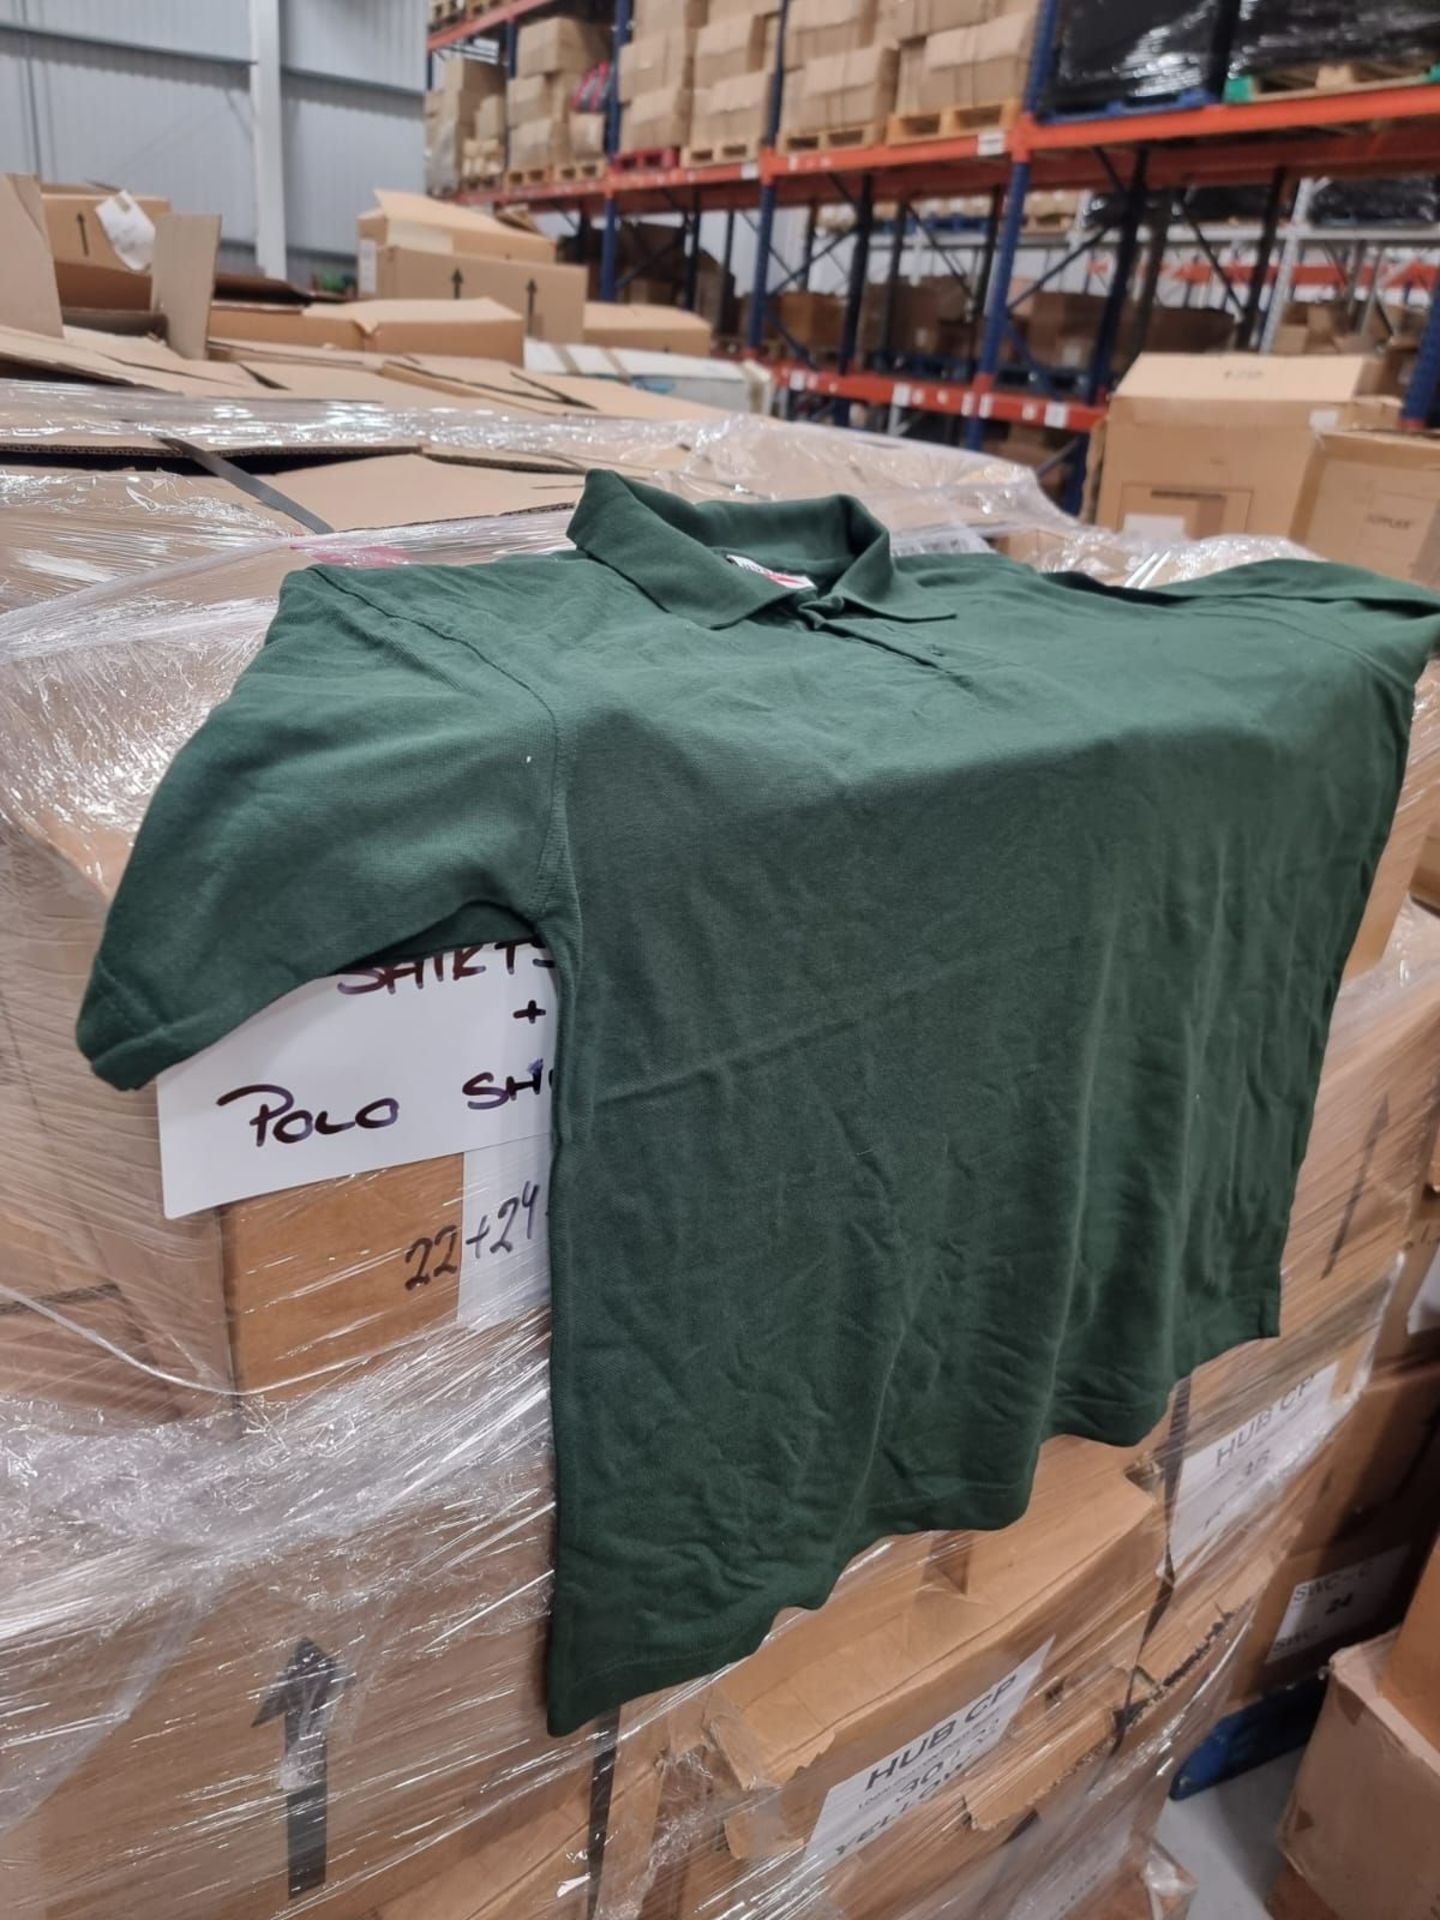 PALLET TO CONTAIN A LARGE QUANTITY OF NEW CLOTHING GOODS. MAY INCLUDE ITEMS SUCH AS: T-SHIRTS, - Image 3 of 28